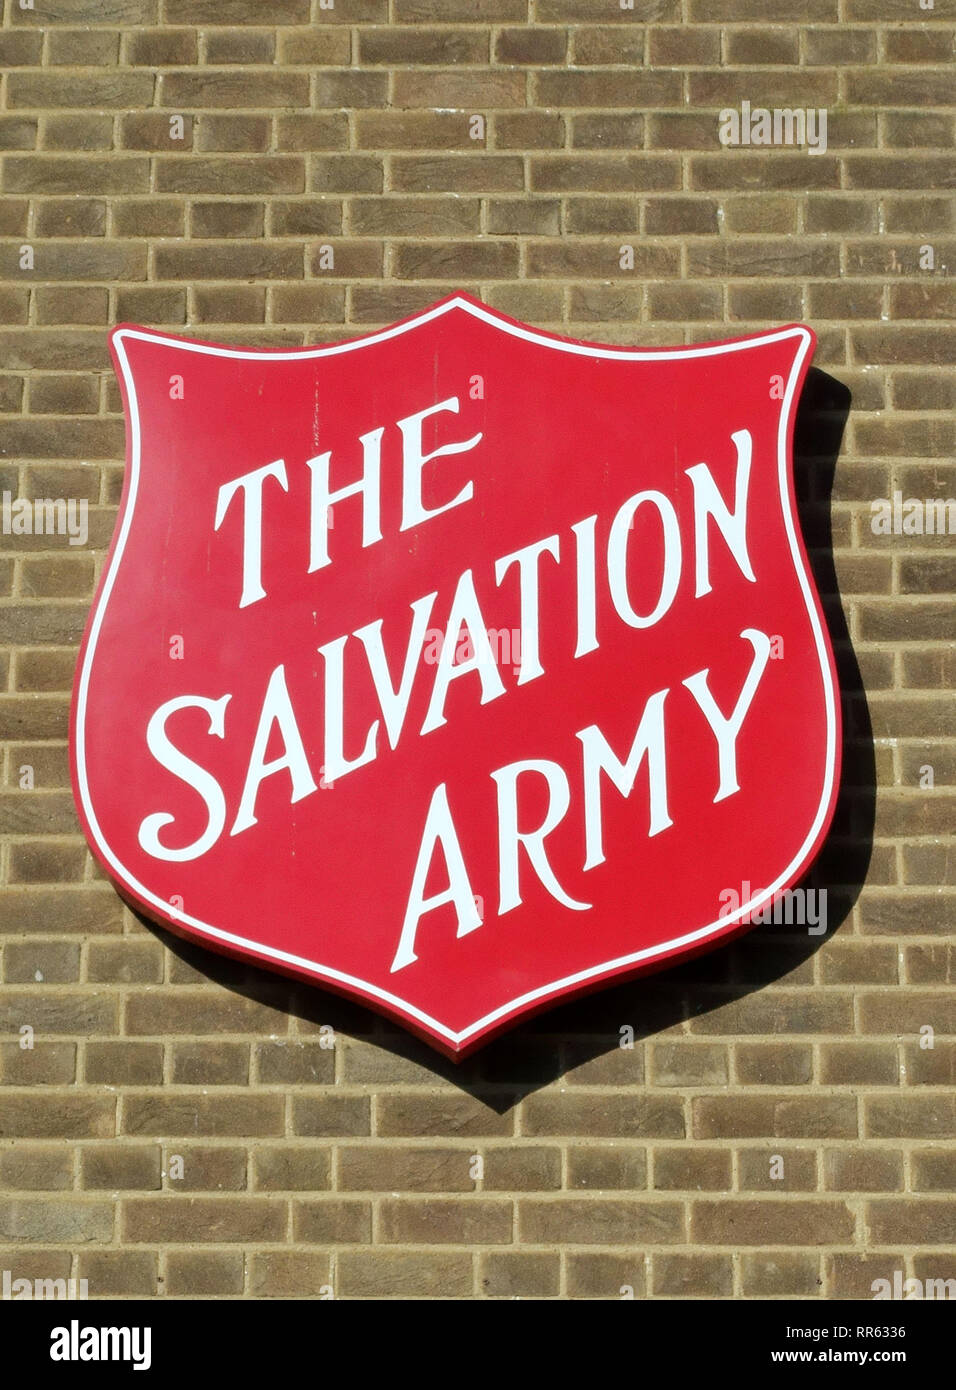 Salvation Army logo on building in South East London Stock Photo